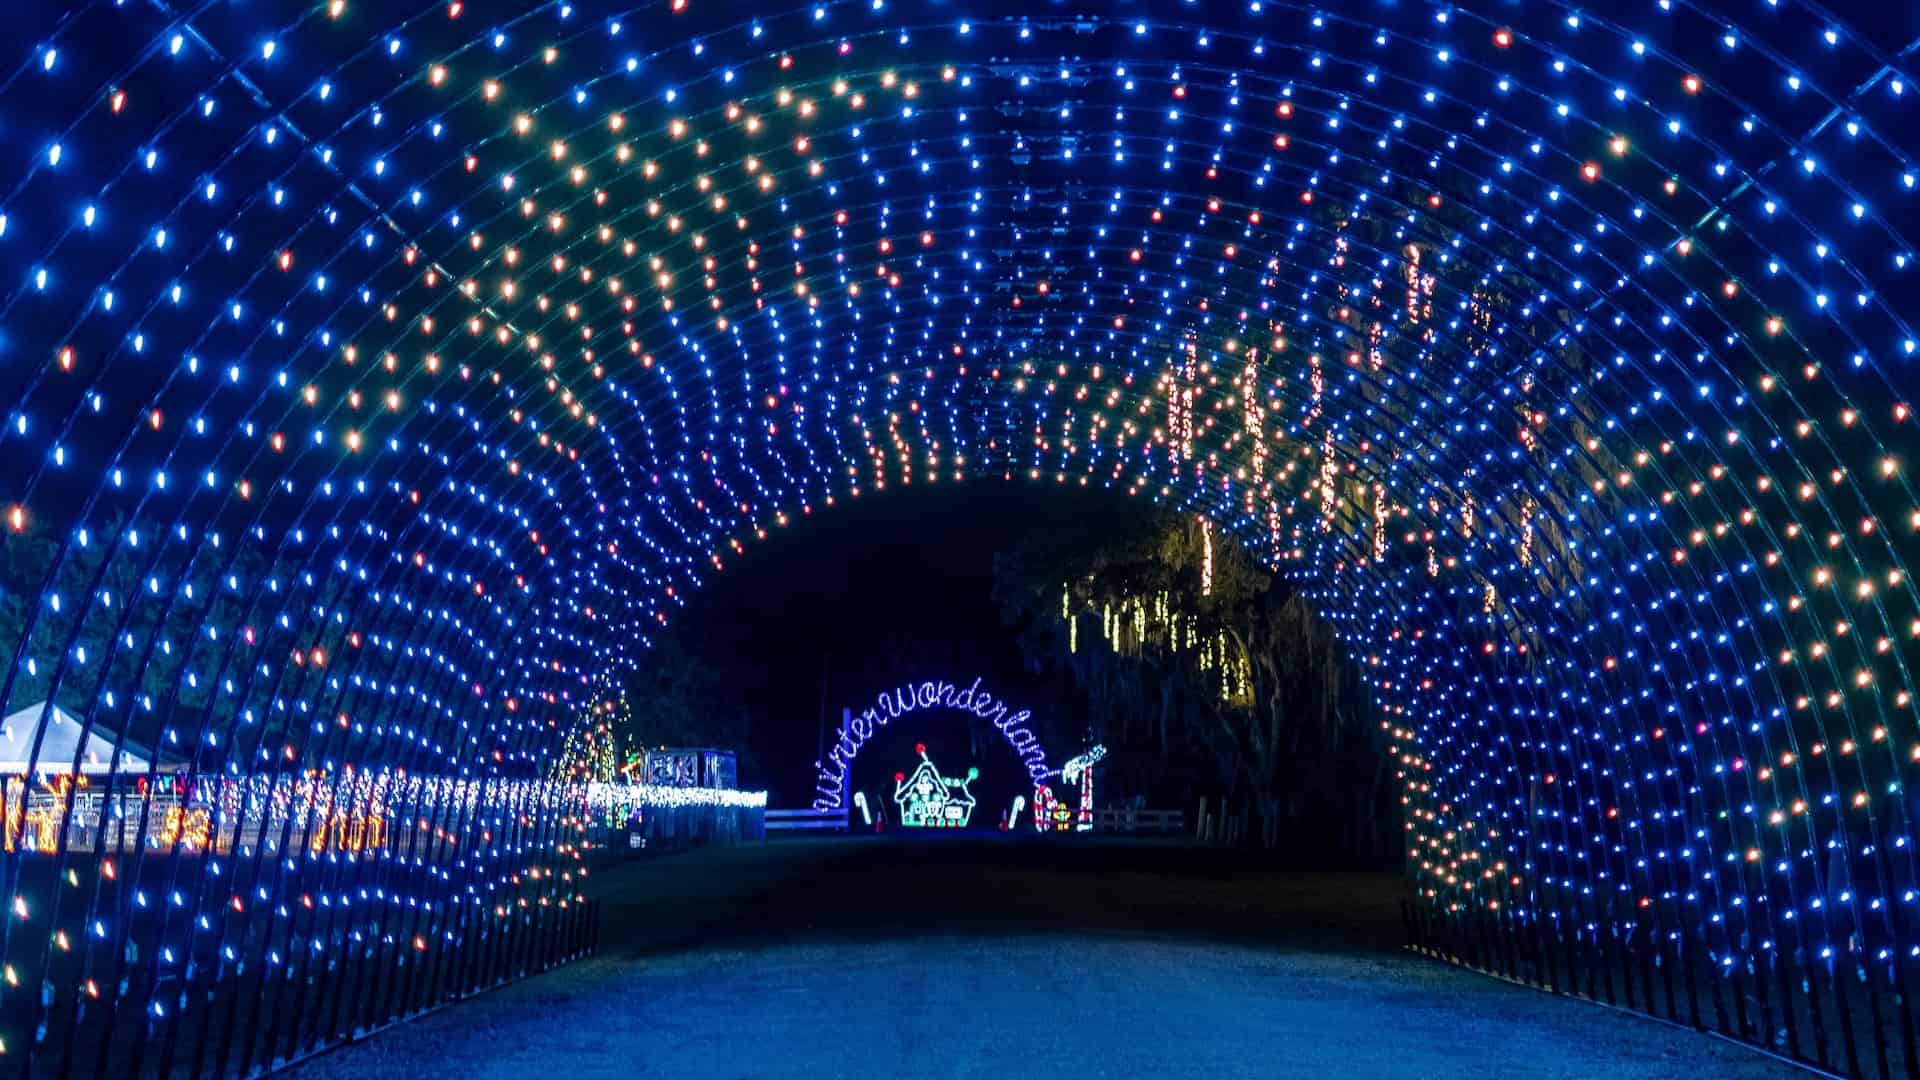 Tampa Bay Festival of Lights returns - That's So Tampa